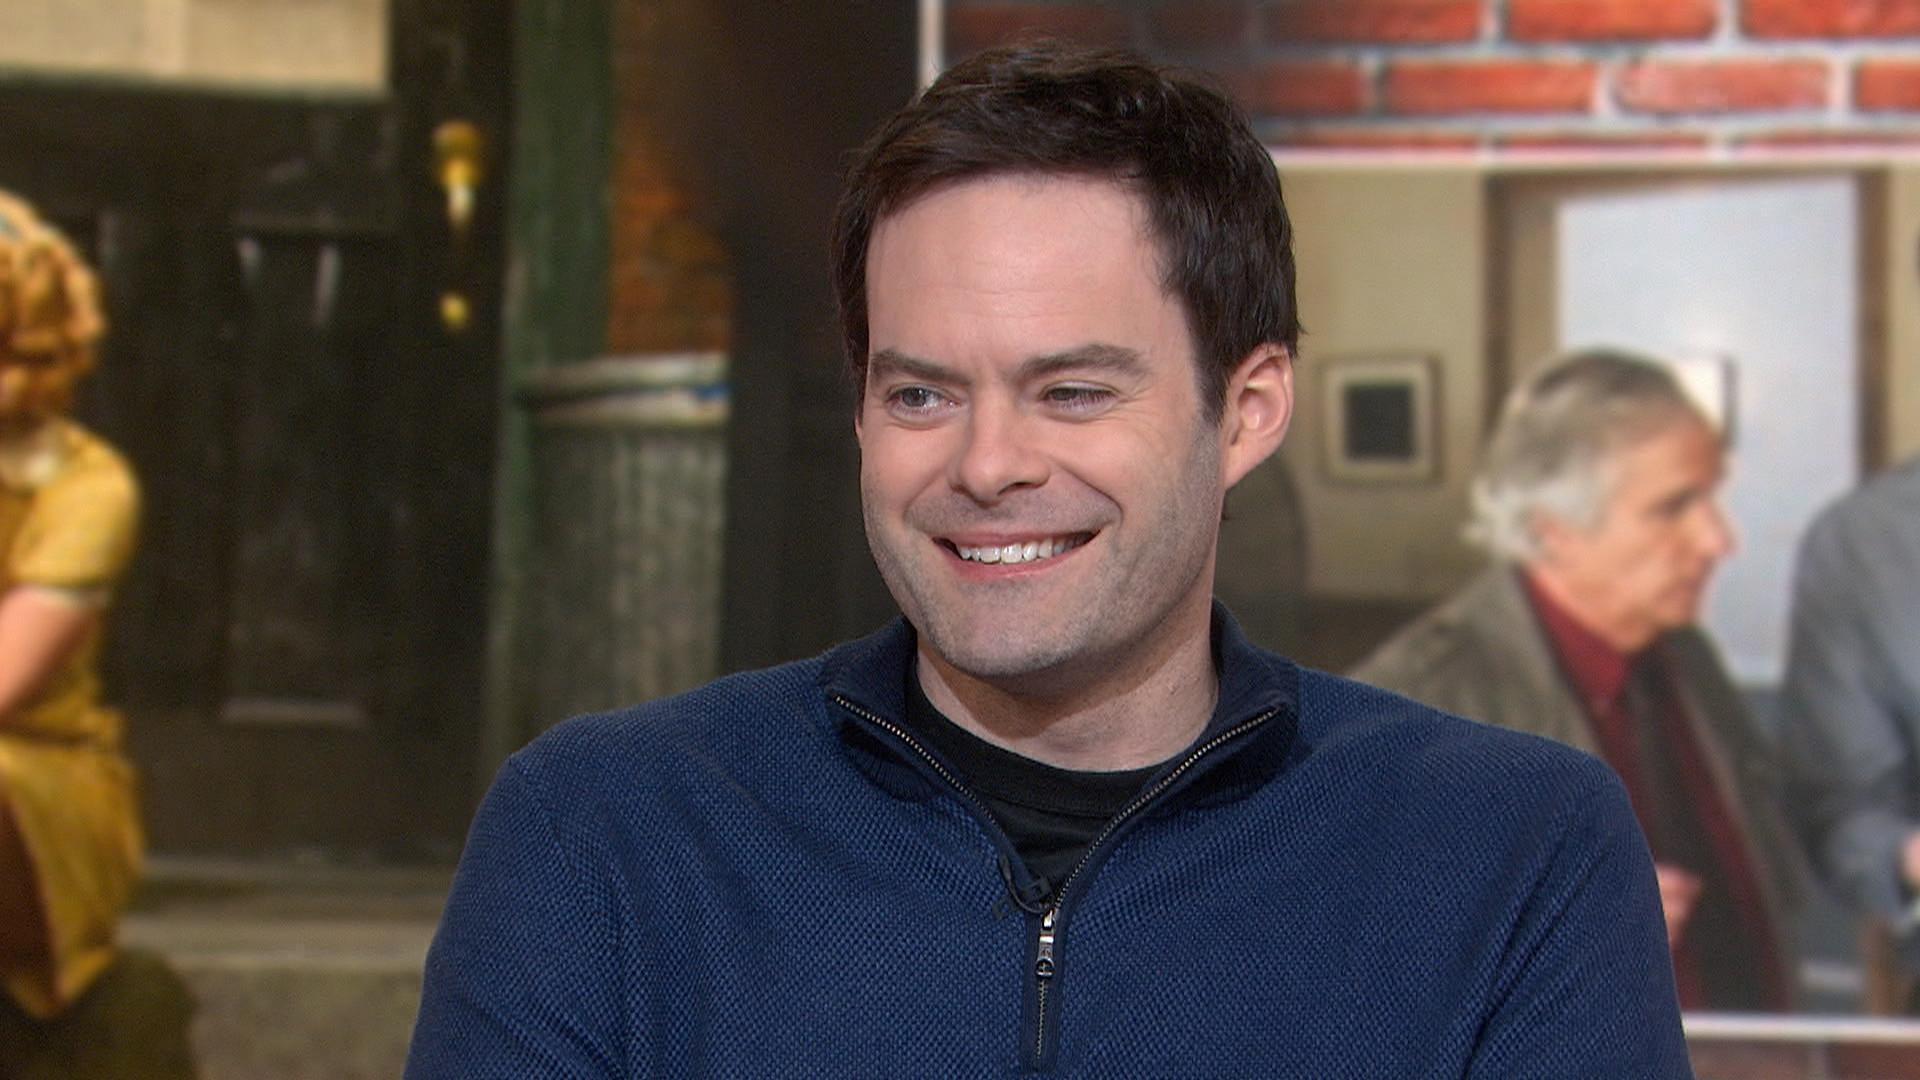 Barry Bill Hader Wallpapers